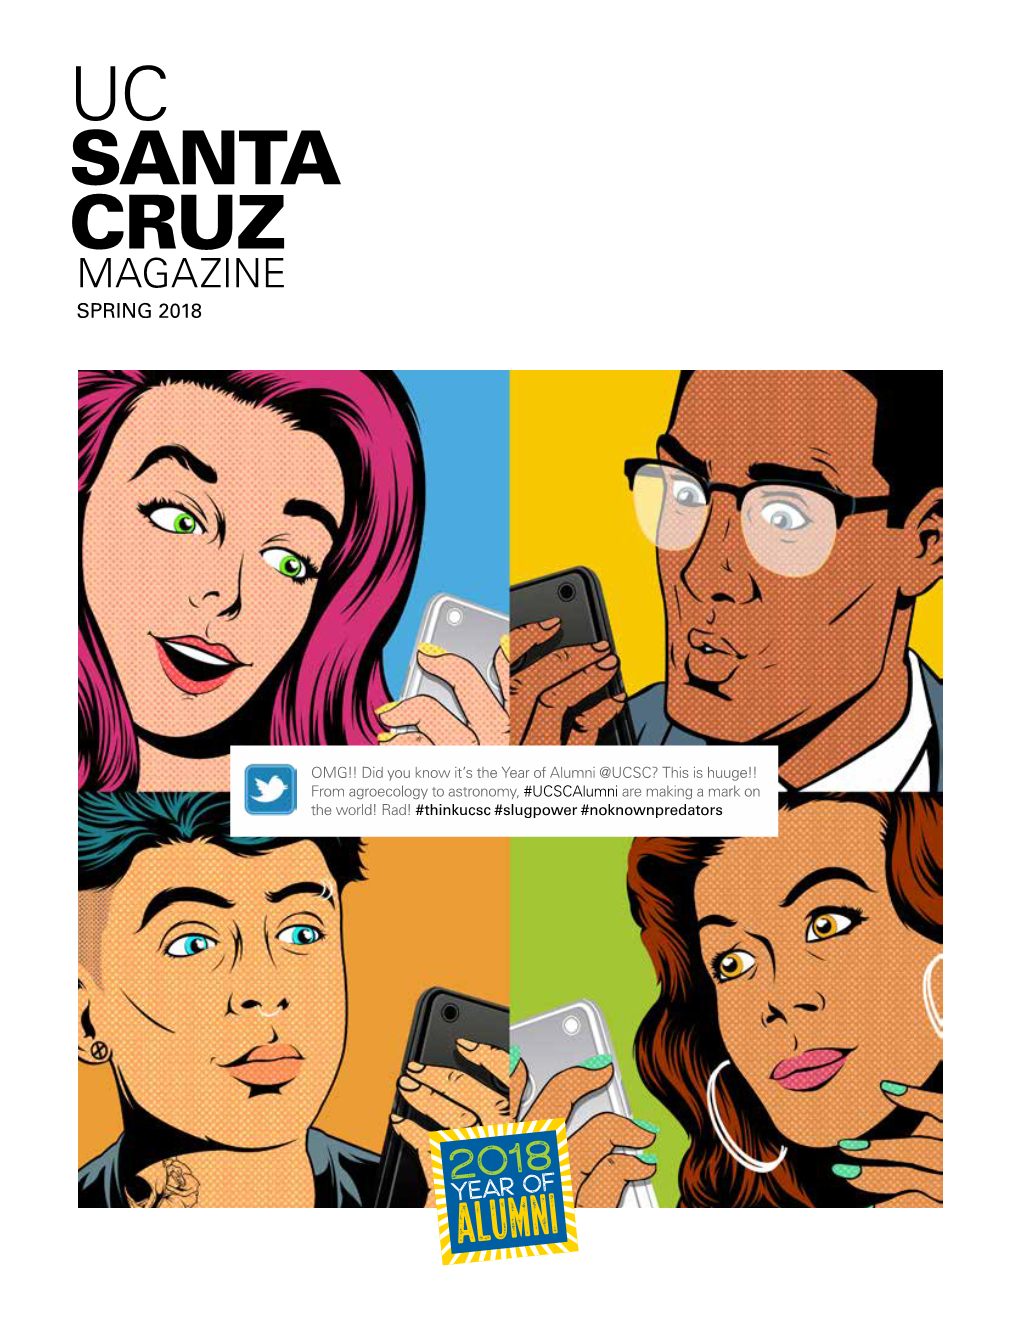 Santa Cruz Comics, a New Glossy Magazine to Successful Careers and Paradigm- That Takes Its Cue from Japanese Manga Comics